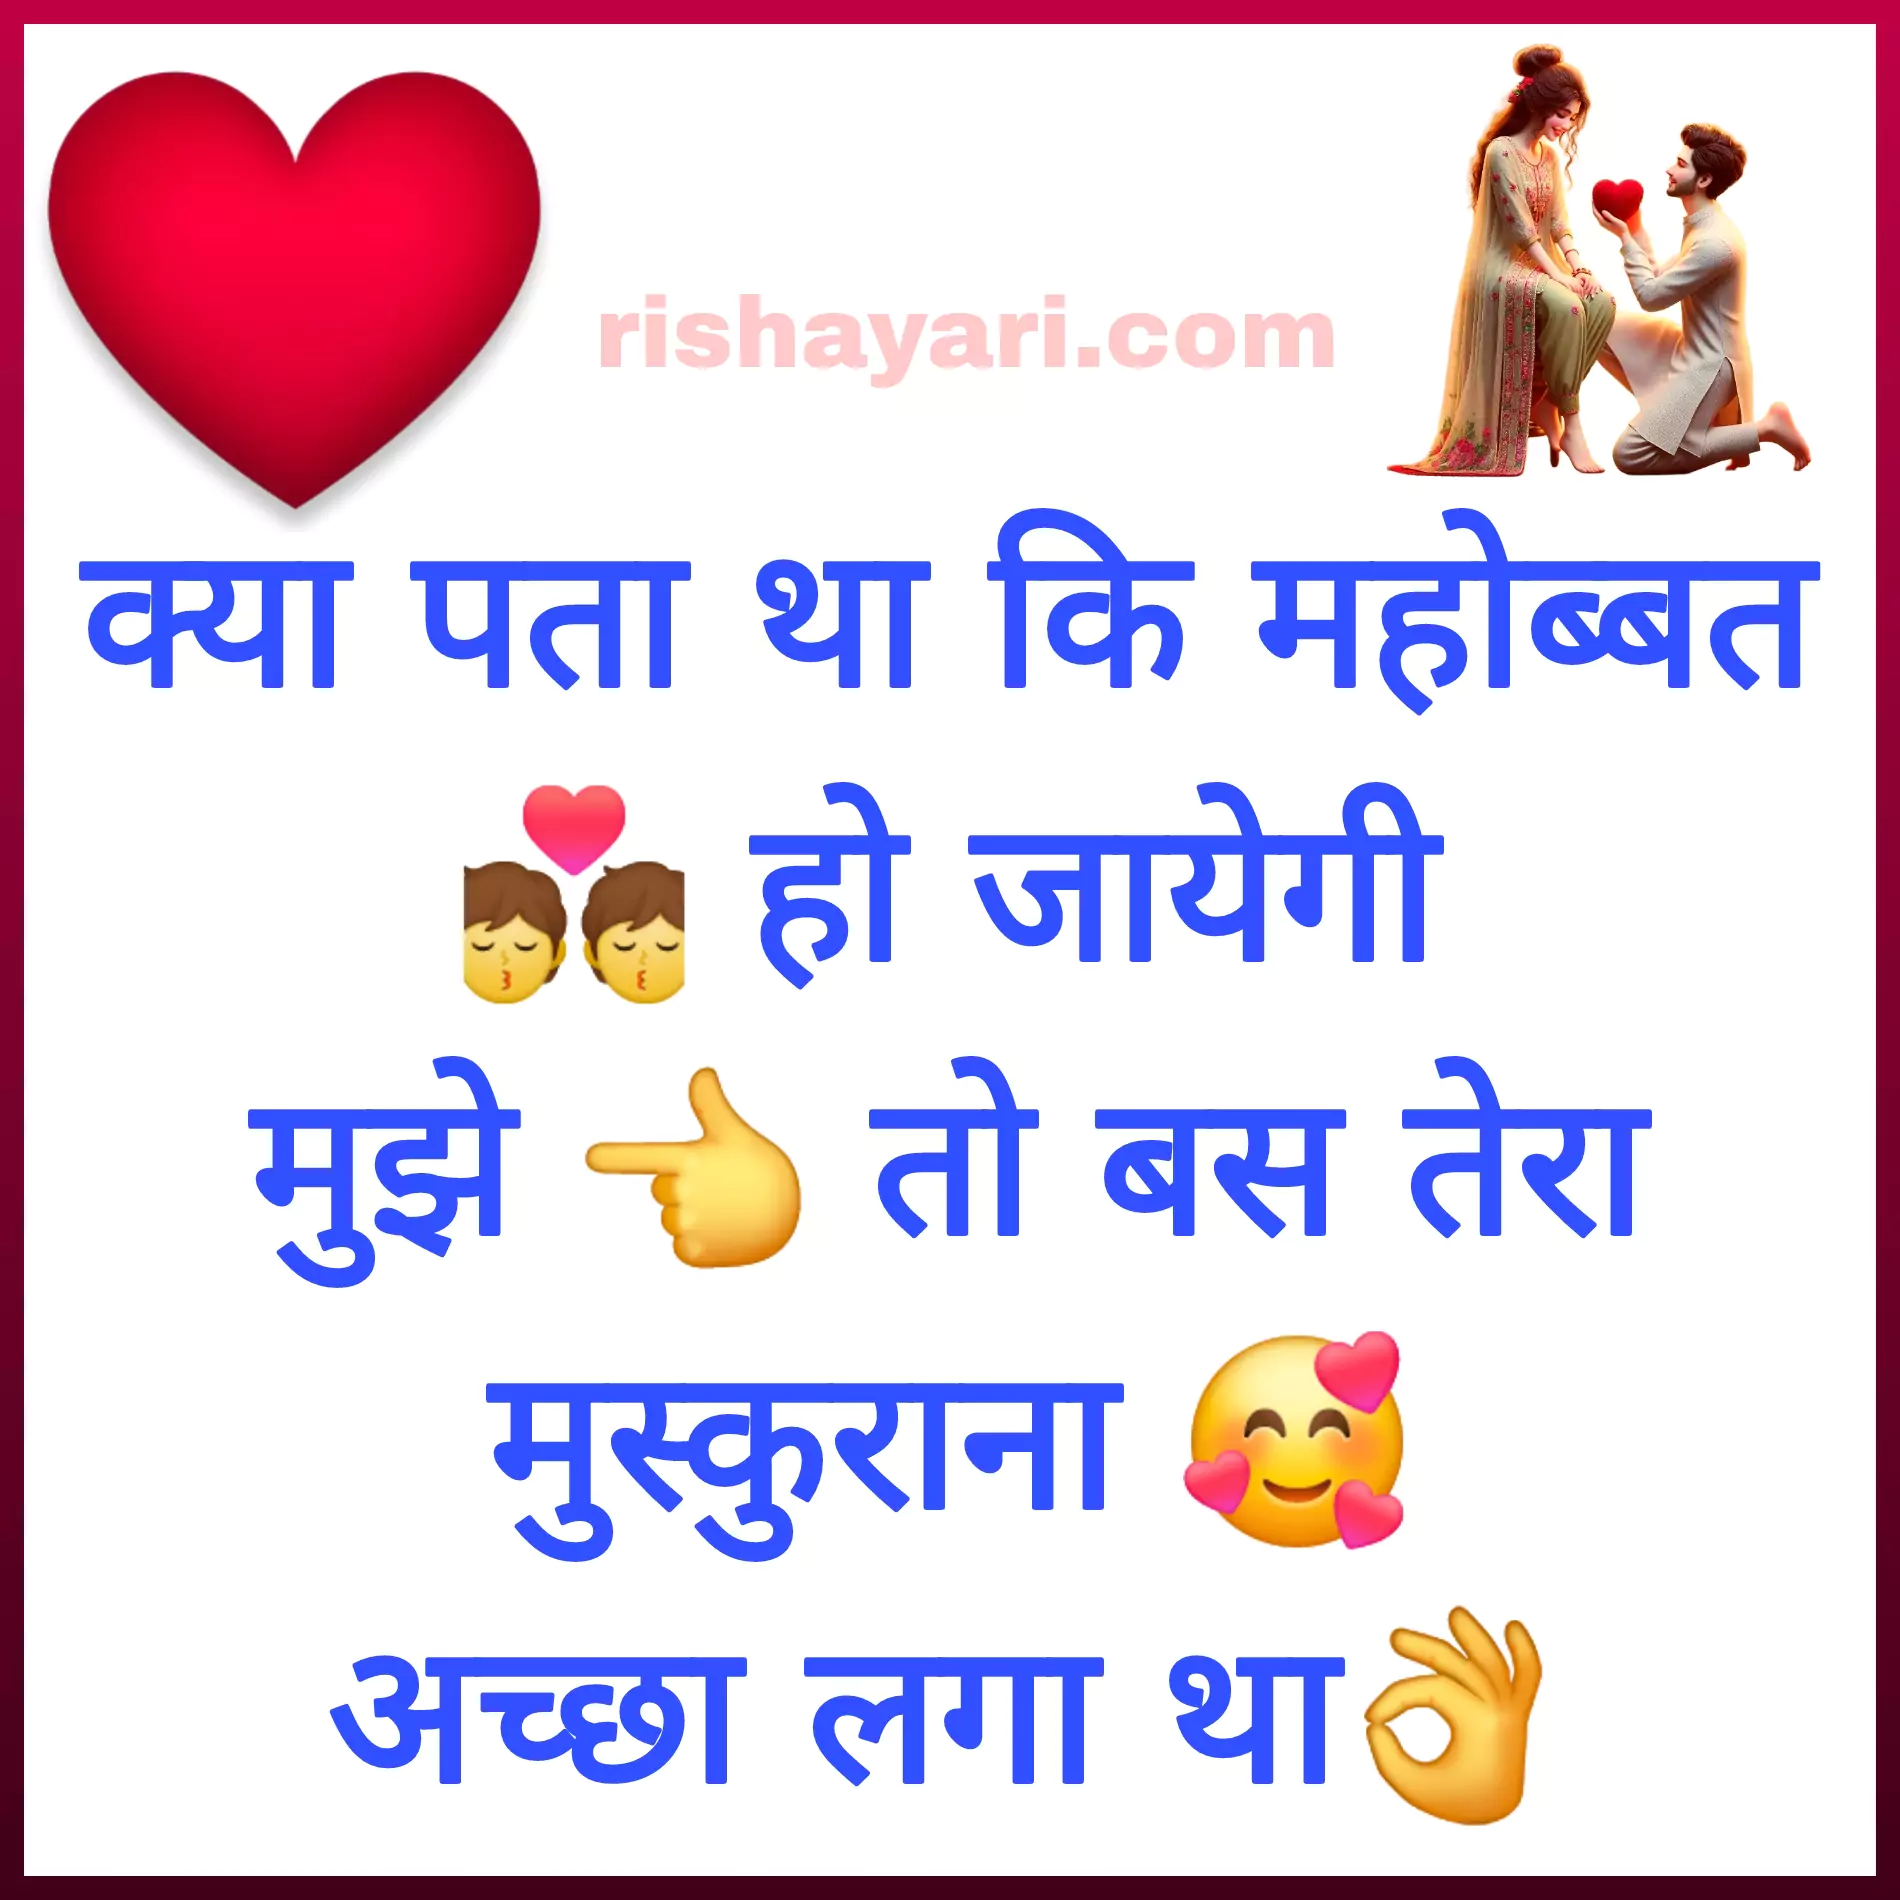 true love quotes in hindi